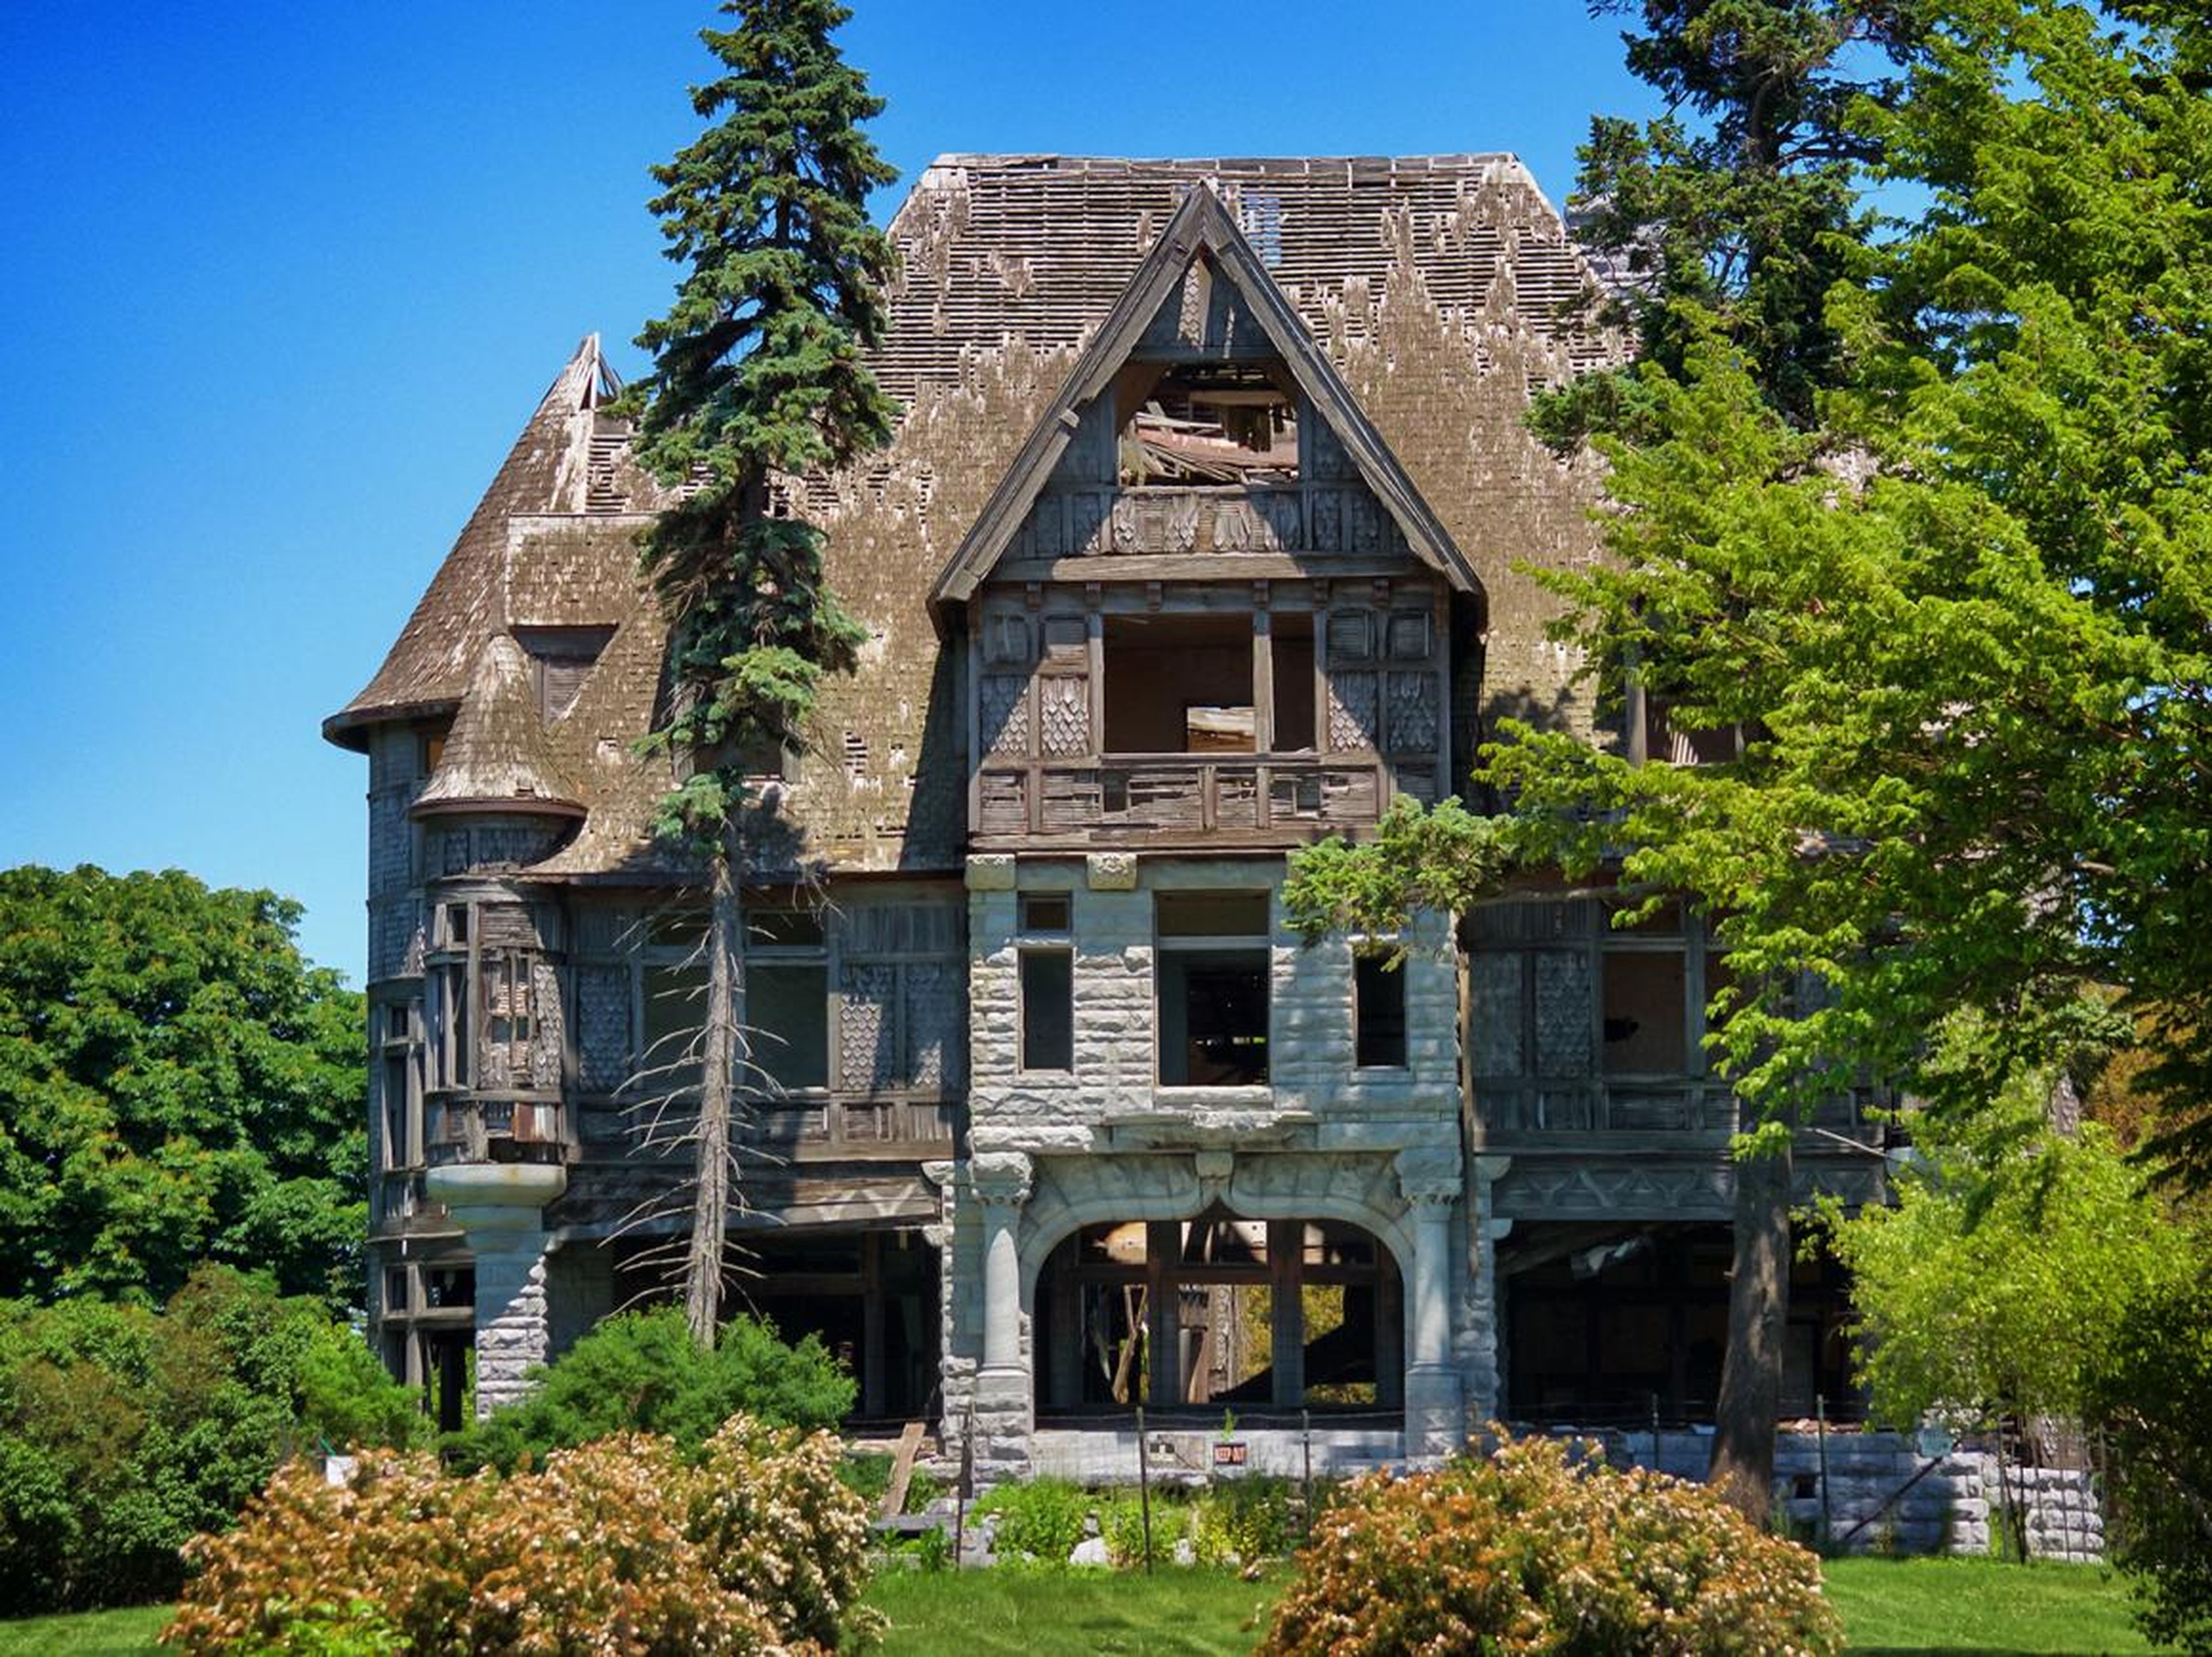 This mansion has been sitting empty for 70 years.